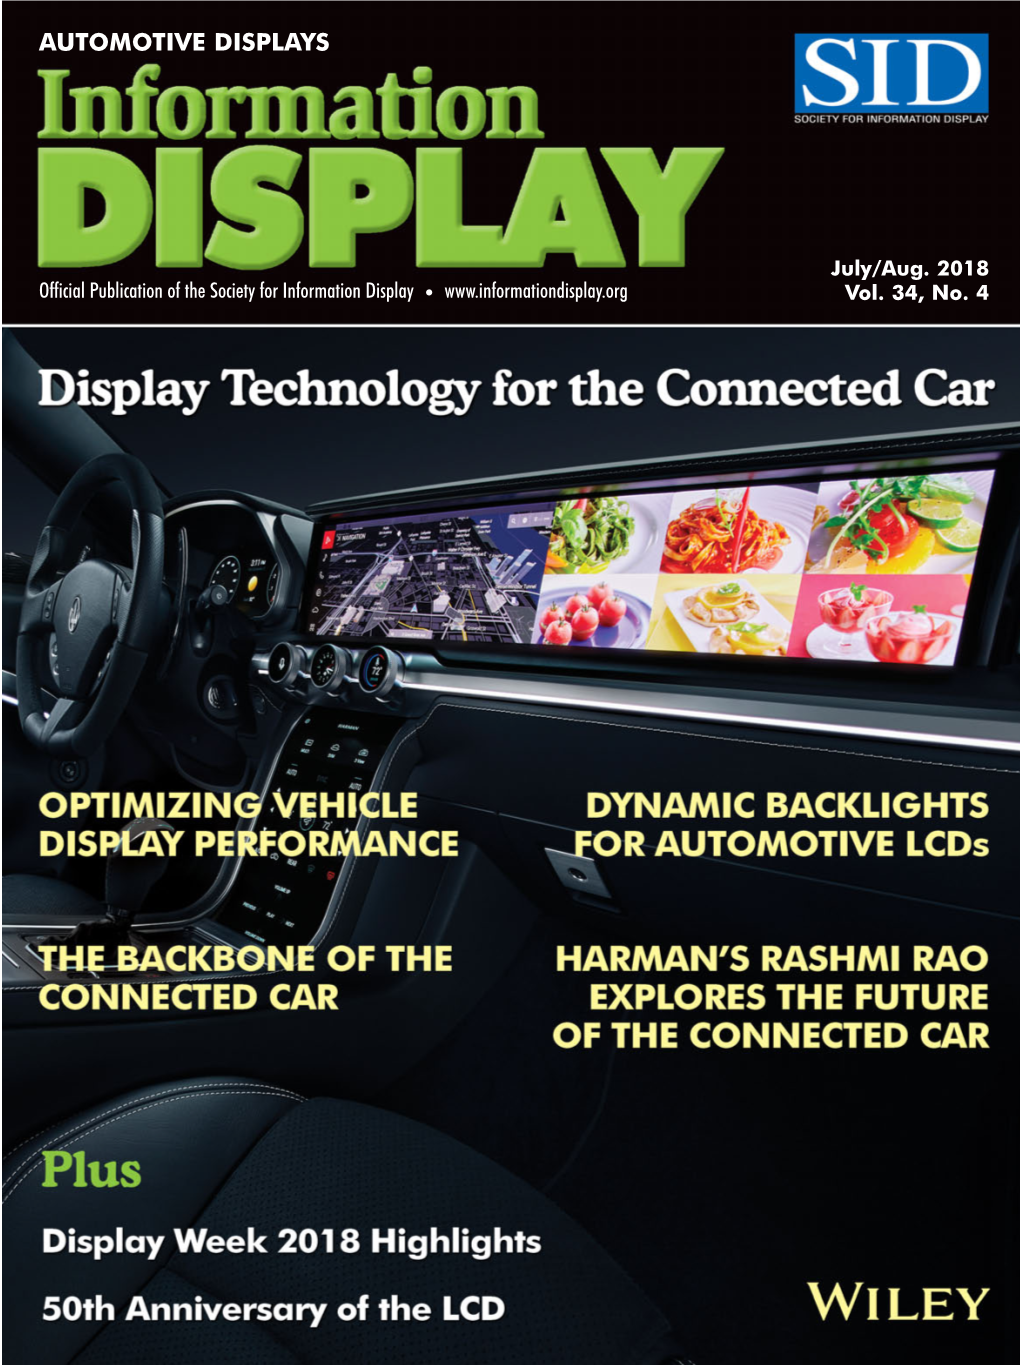 Information Display Magazine July/August 2018 Issue 4